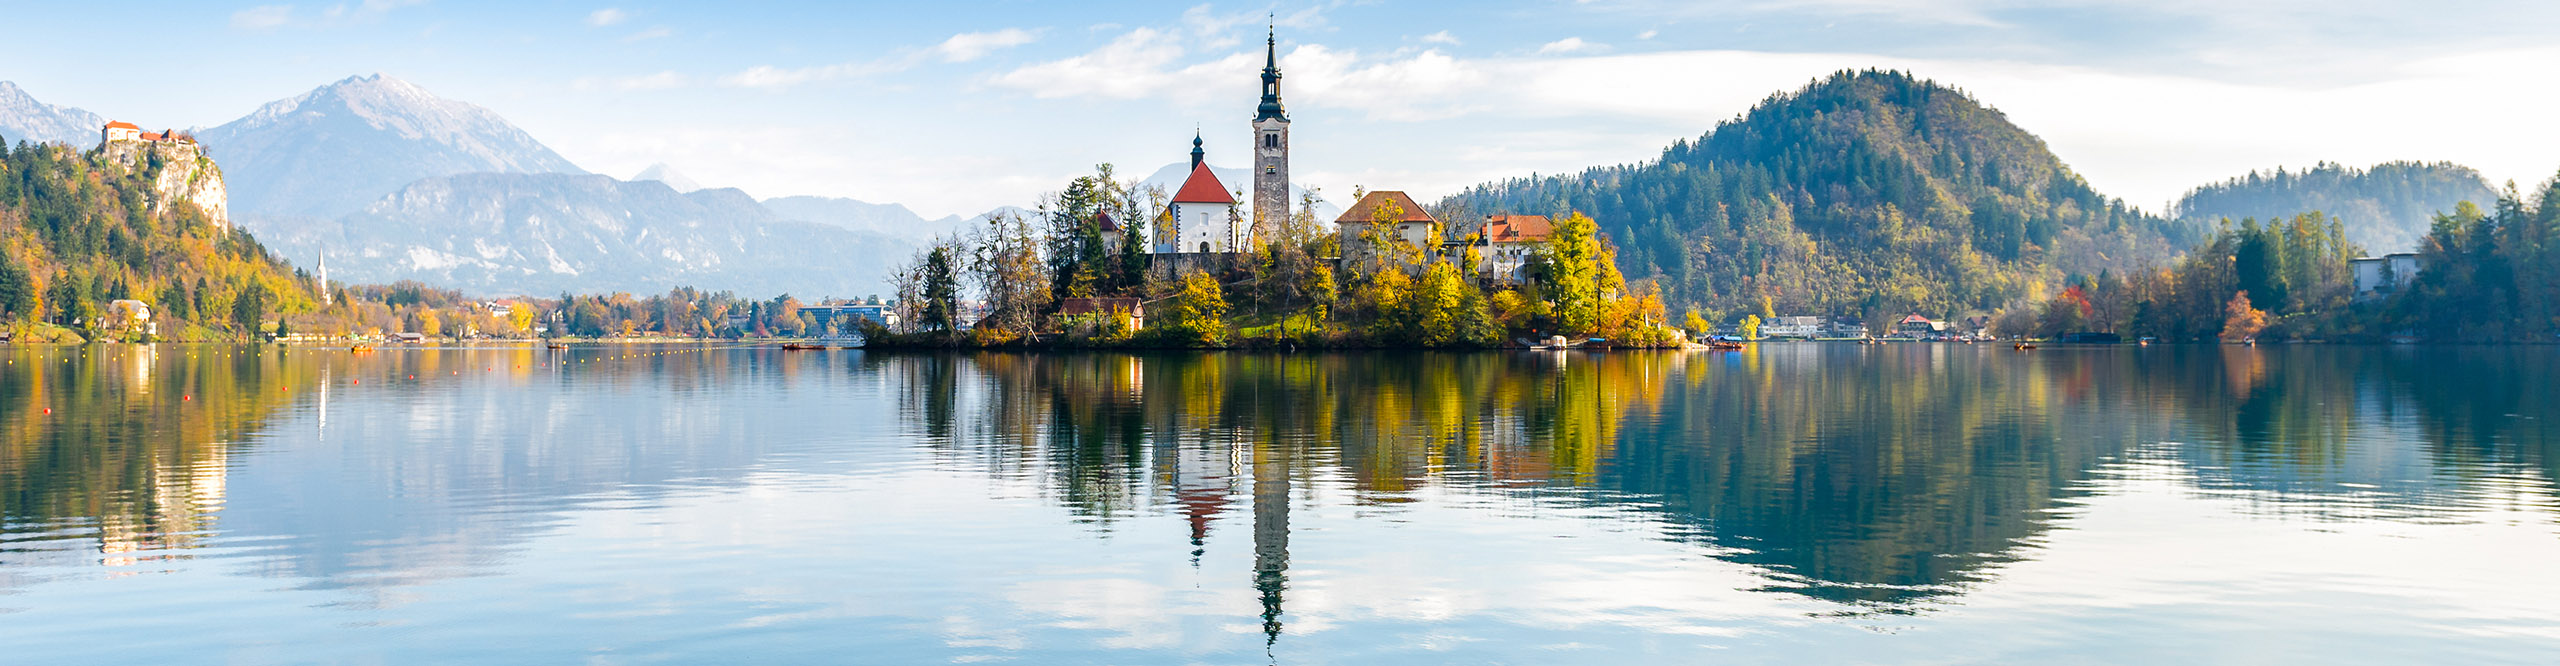 Lake Bled Slovenia, mountain lake with Assumption of Maria Pilgrimage church reflects in calm water.